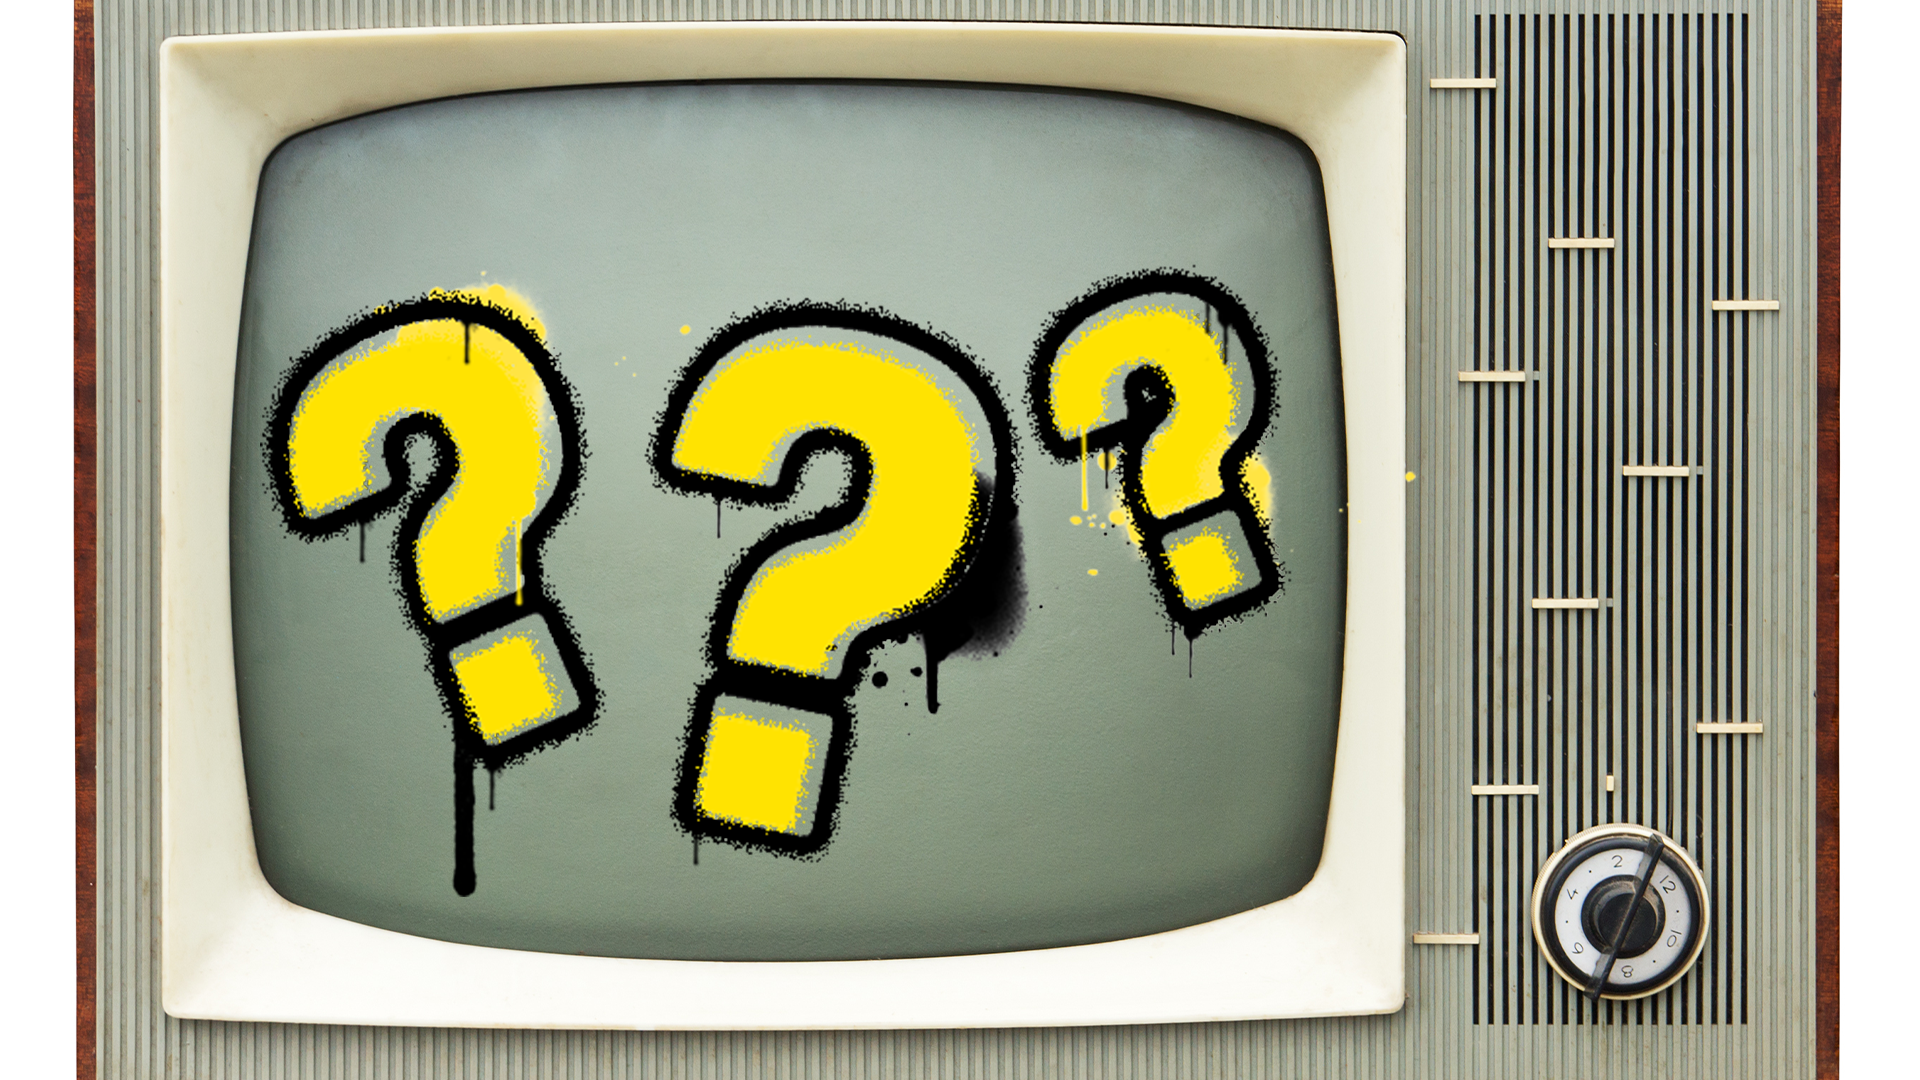 Old fashioned TV set and question marks 